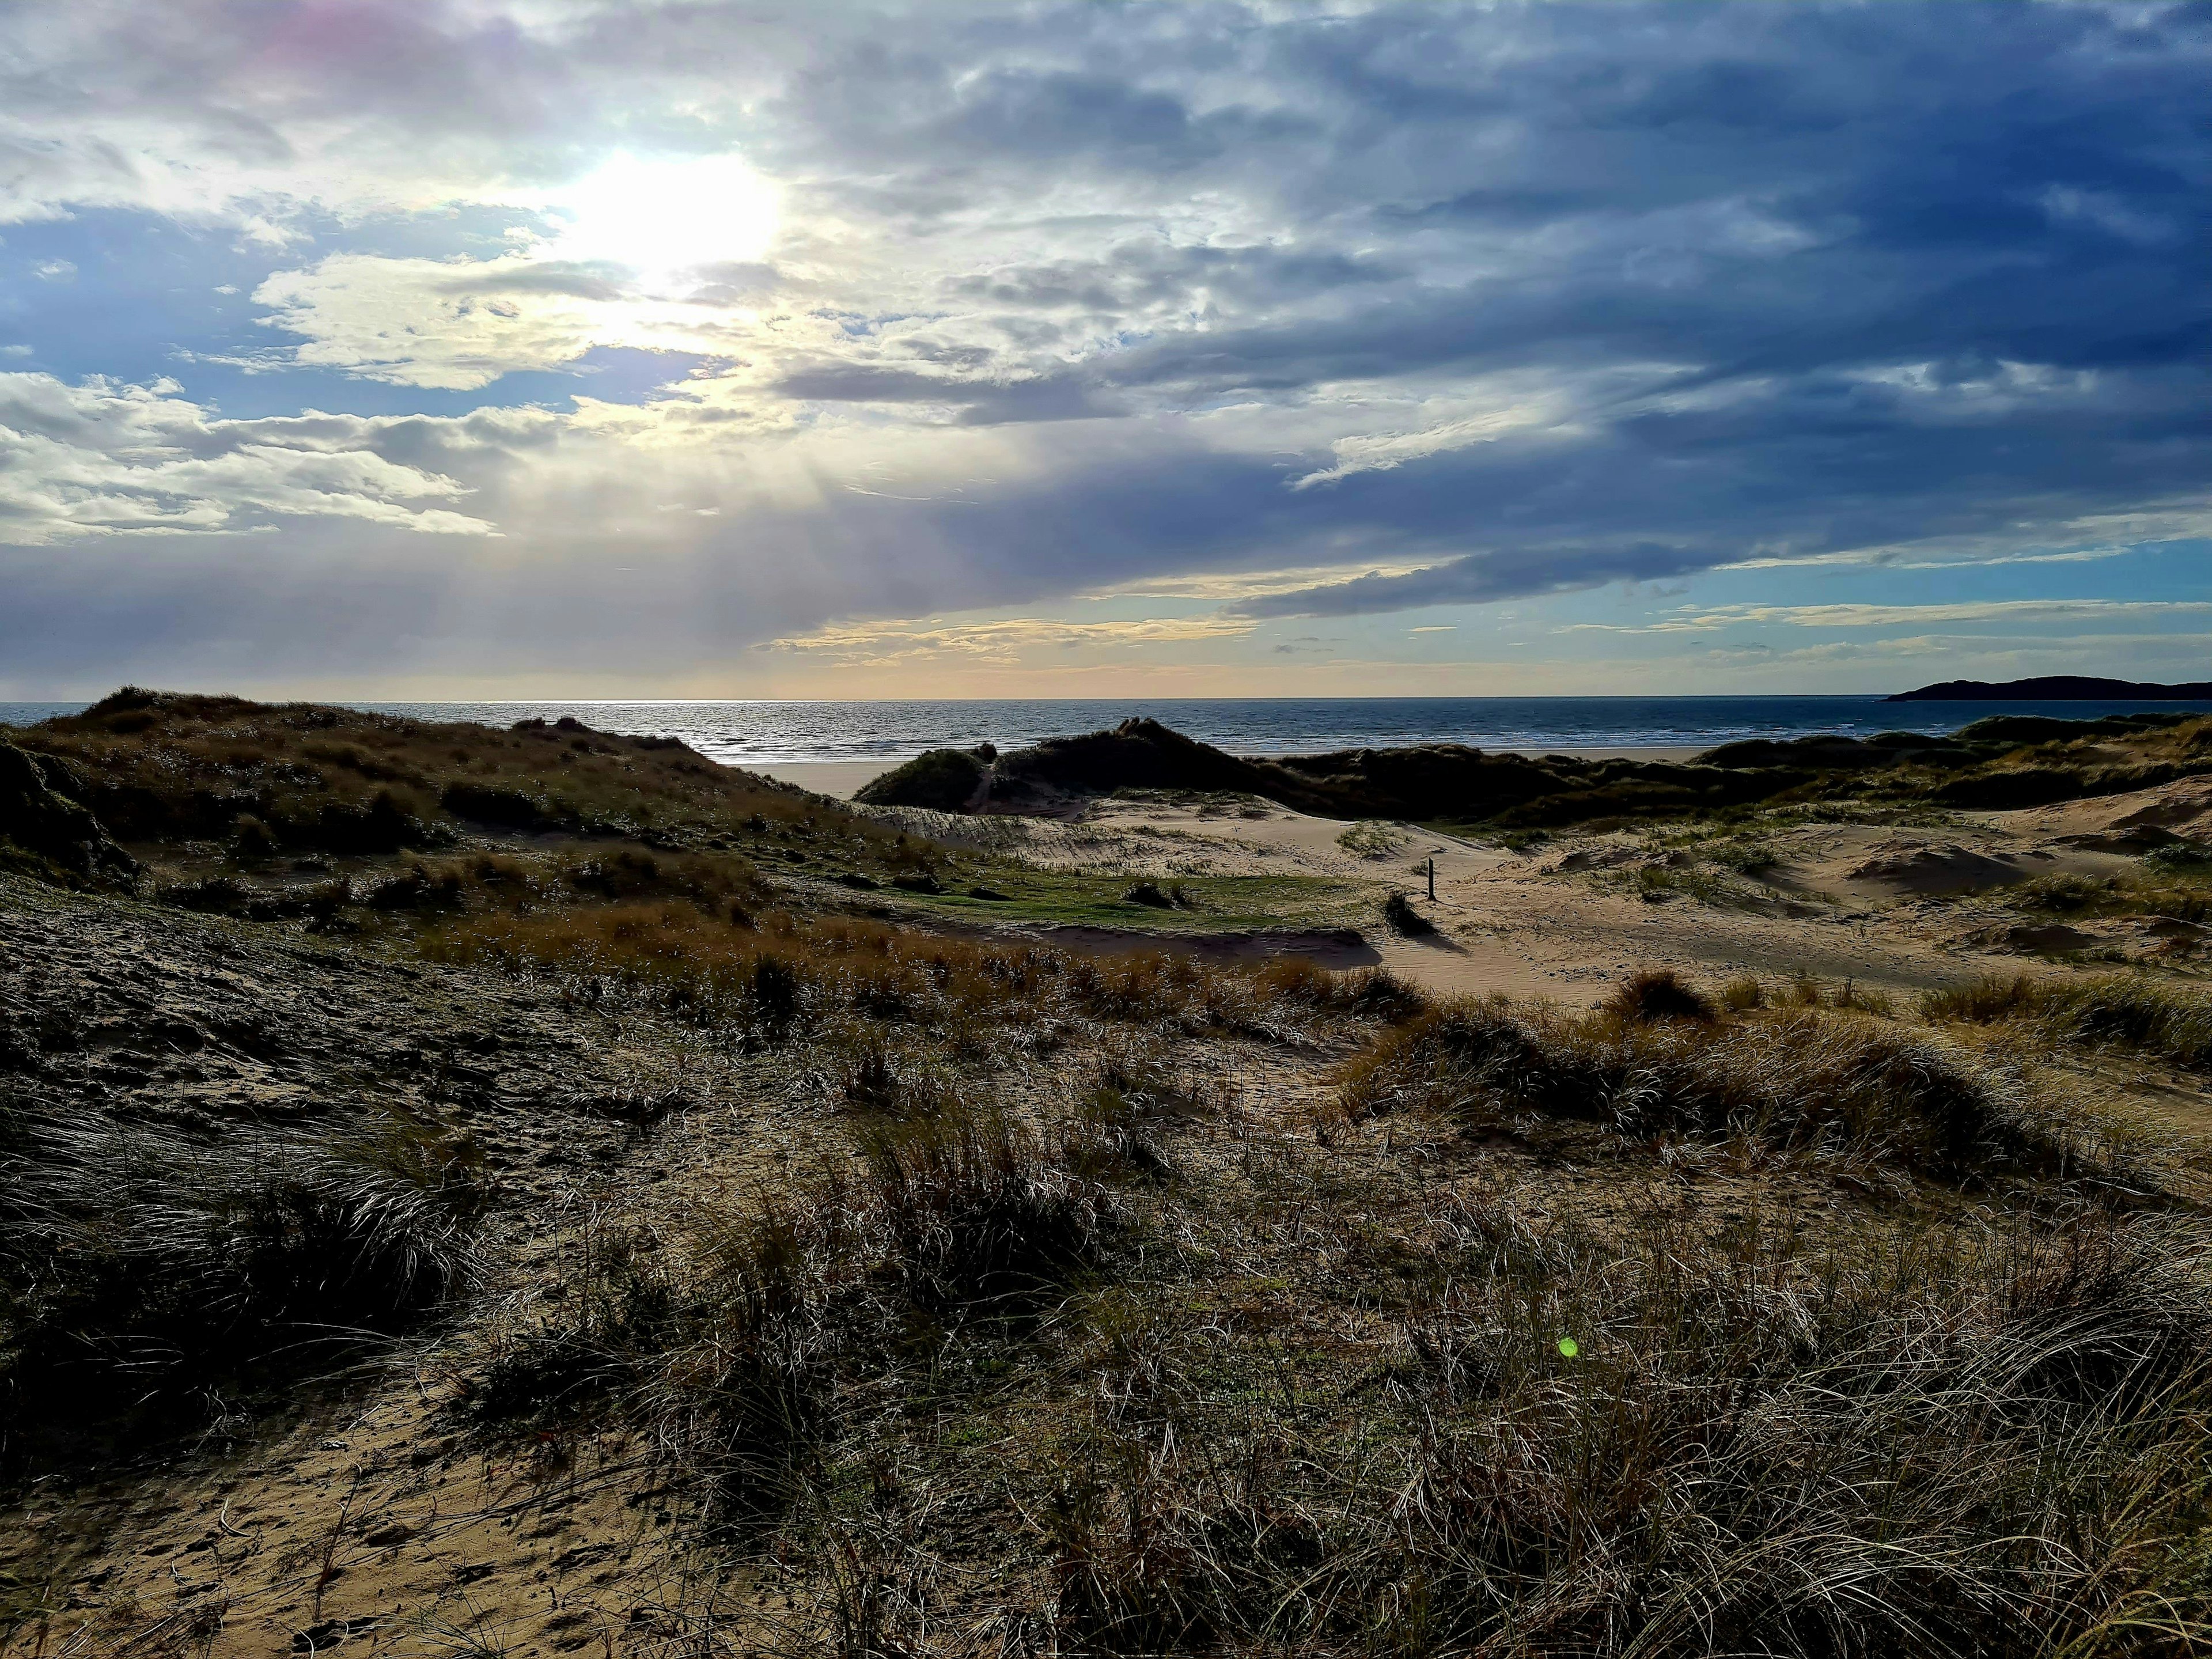 Sand dunes and grass with the ocean on the horizon and sun beams coming through the clouds